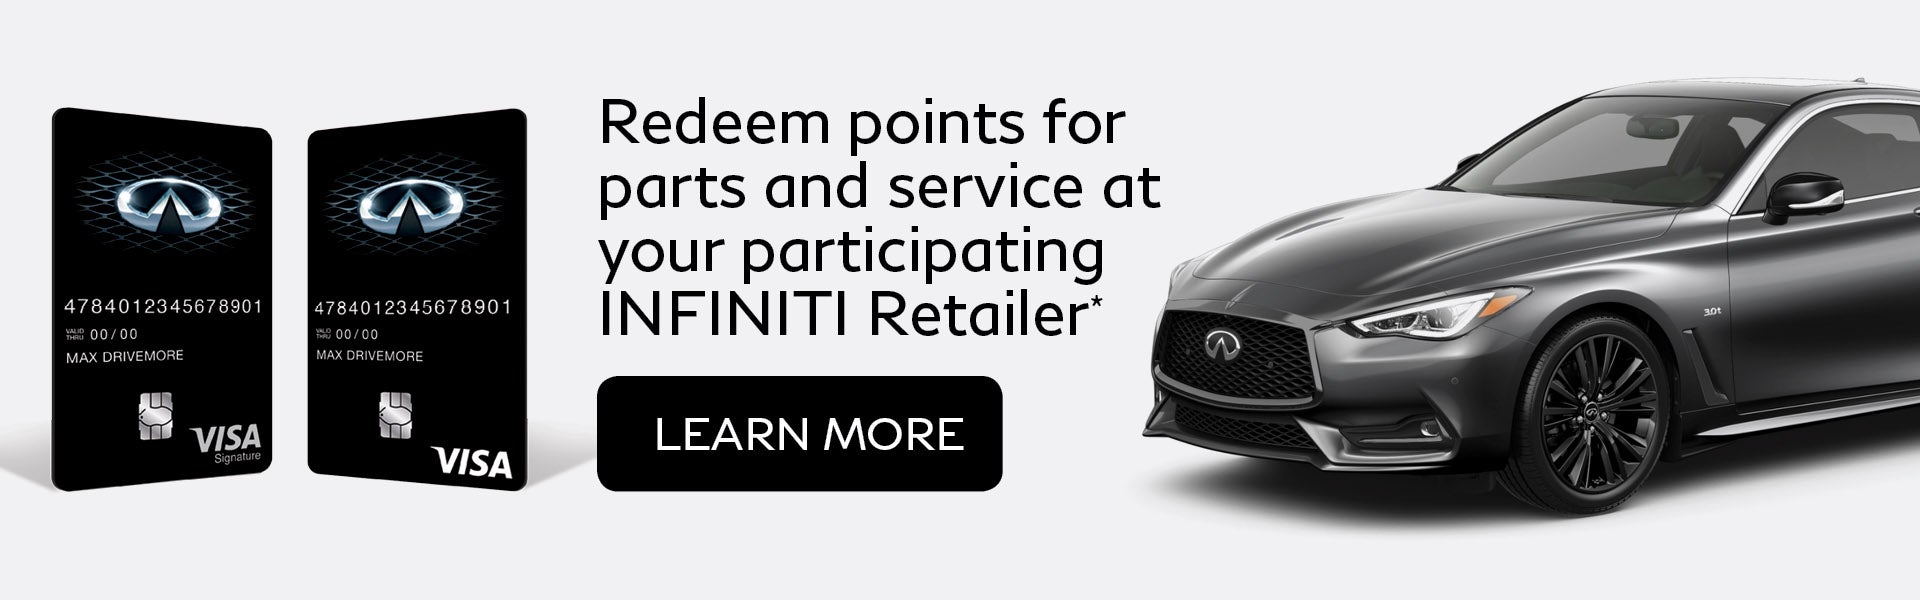 redeem points for parts and service at your participating INFINITI retailer*. learn more.